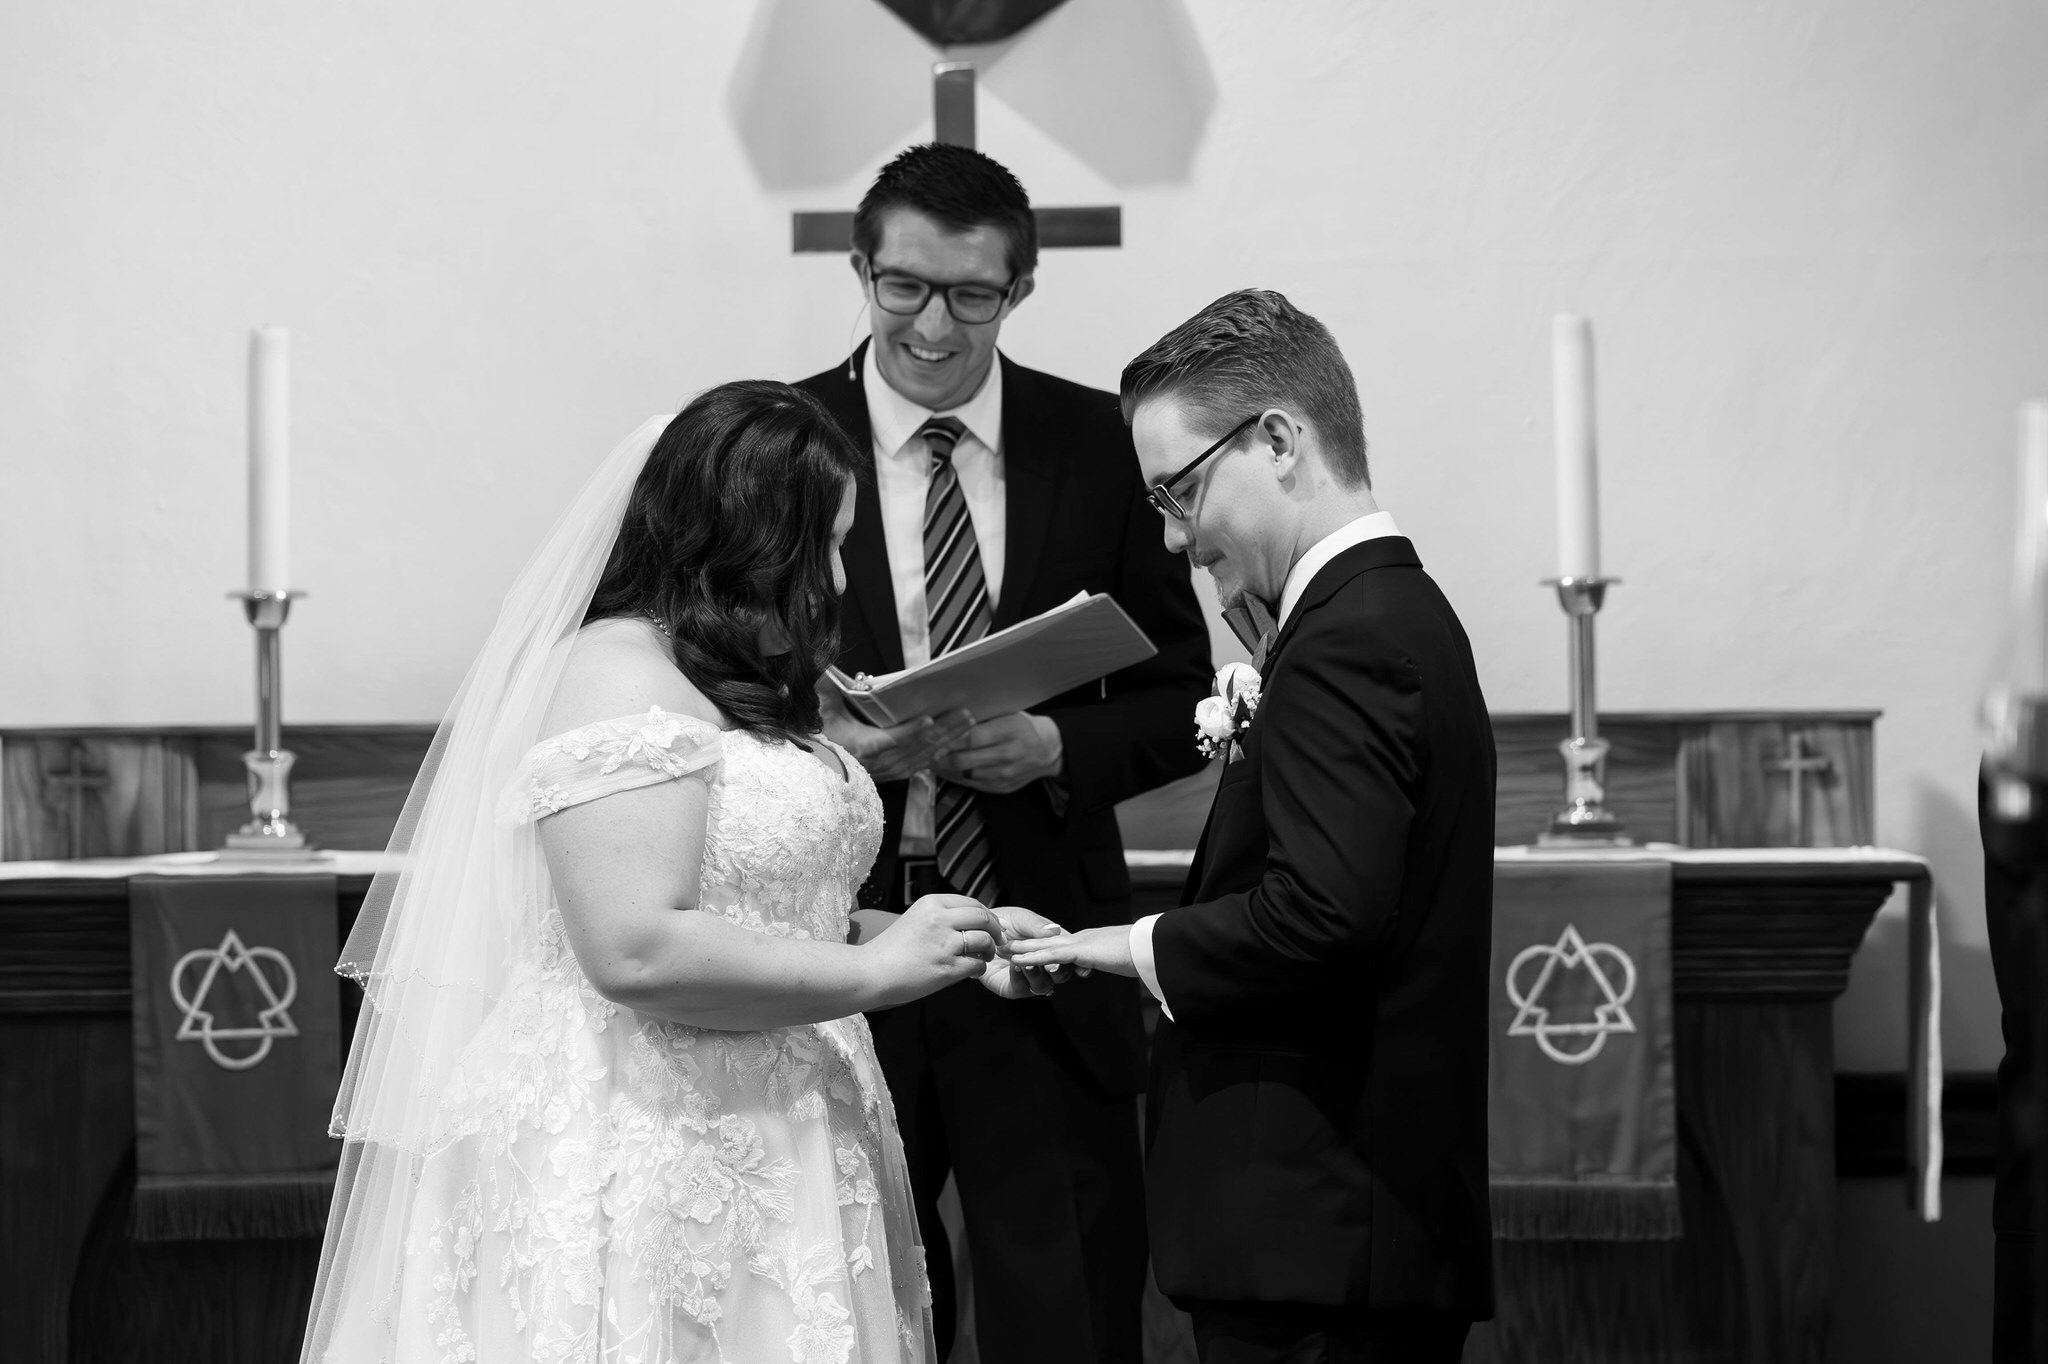 The bride and groom exchange rings at the altar on their wedding day at Immanuel Lutheran Church in Macomb, MI. 